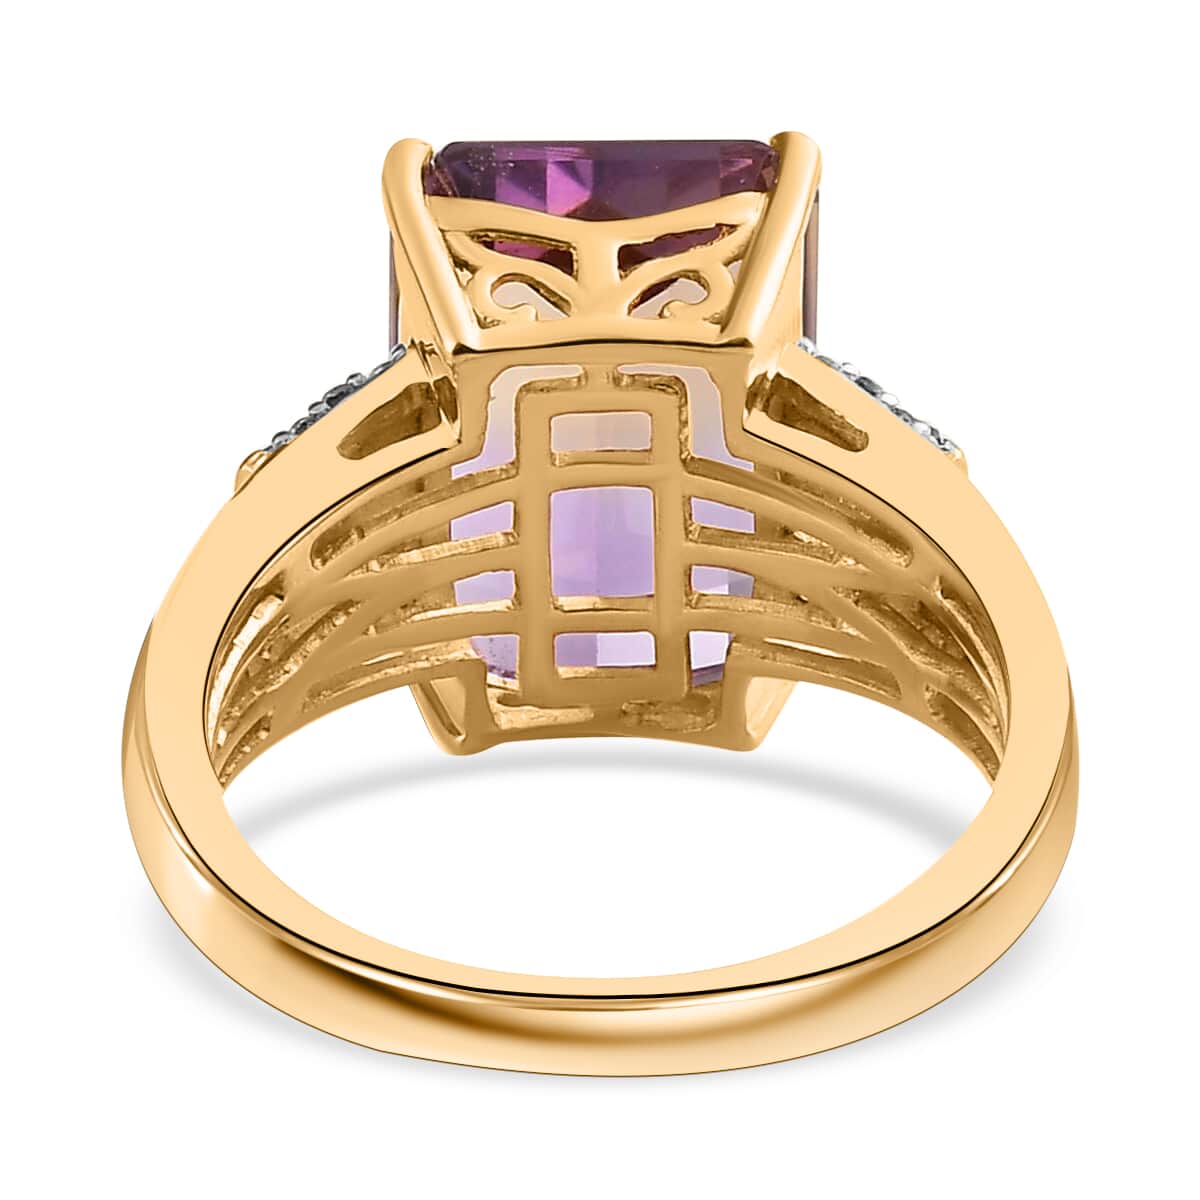 AAA Anahi Ametrine and Multi Gemstone Ring in Vermeil Yellow Gold Over Sterling Silver, Ametrine Jewelry, Birthday Gift For Her 7.25 ctw (Del. 10-15 Days) image number 4